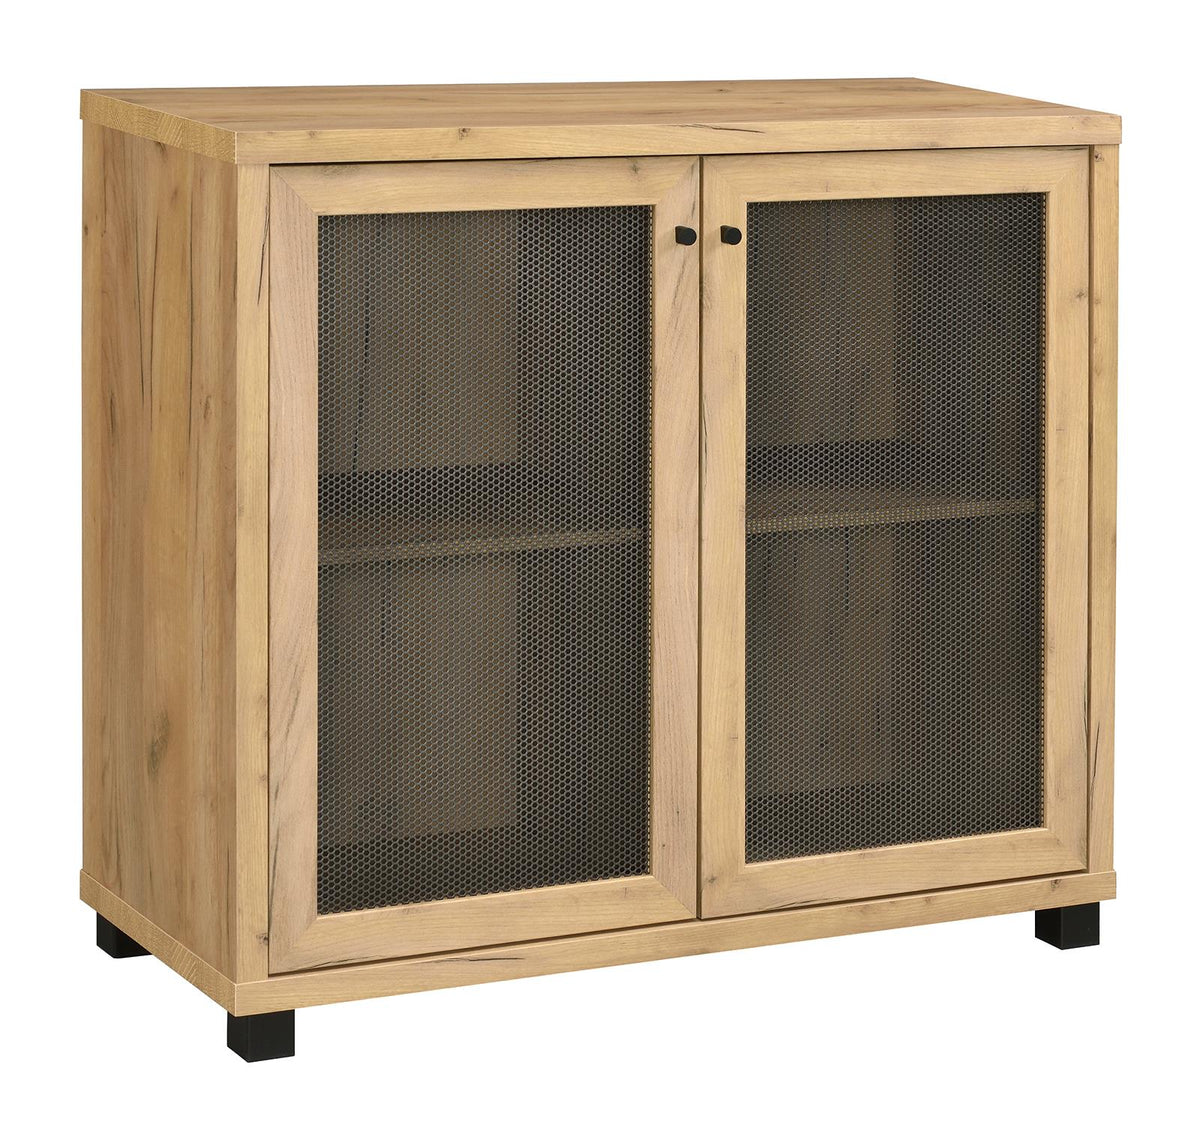 Mchale Accent Cabinet with Two Mesh Doors Golden Oak Mchale Accent Cabinet with Two Mesh Doors Golden Oak Half Price Furniture